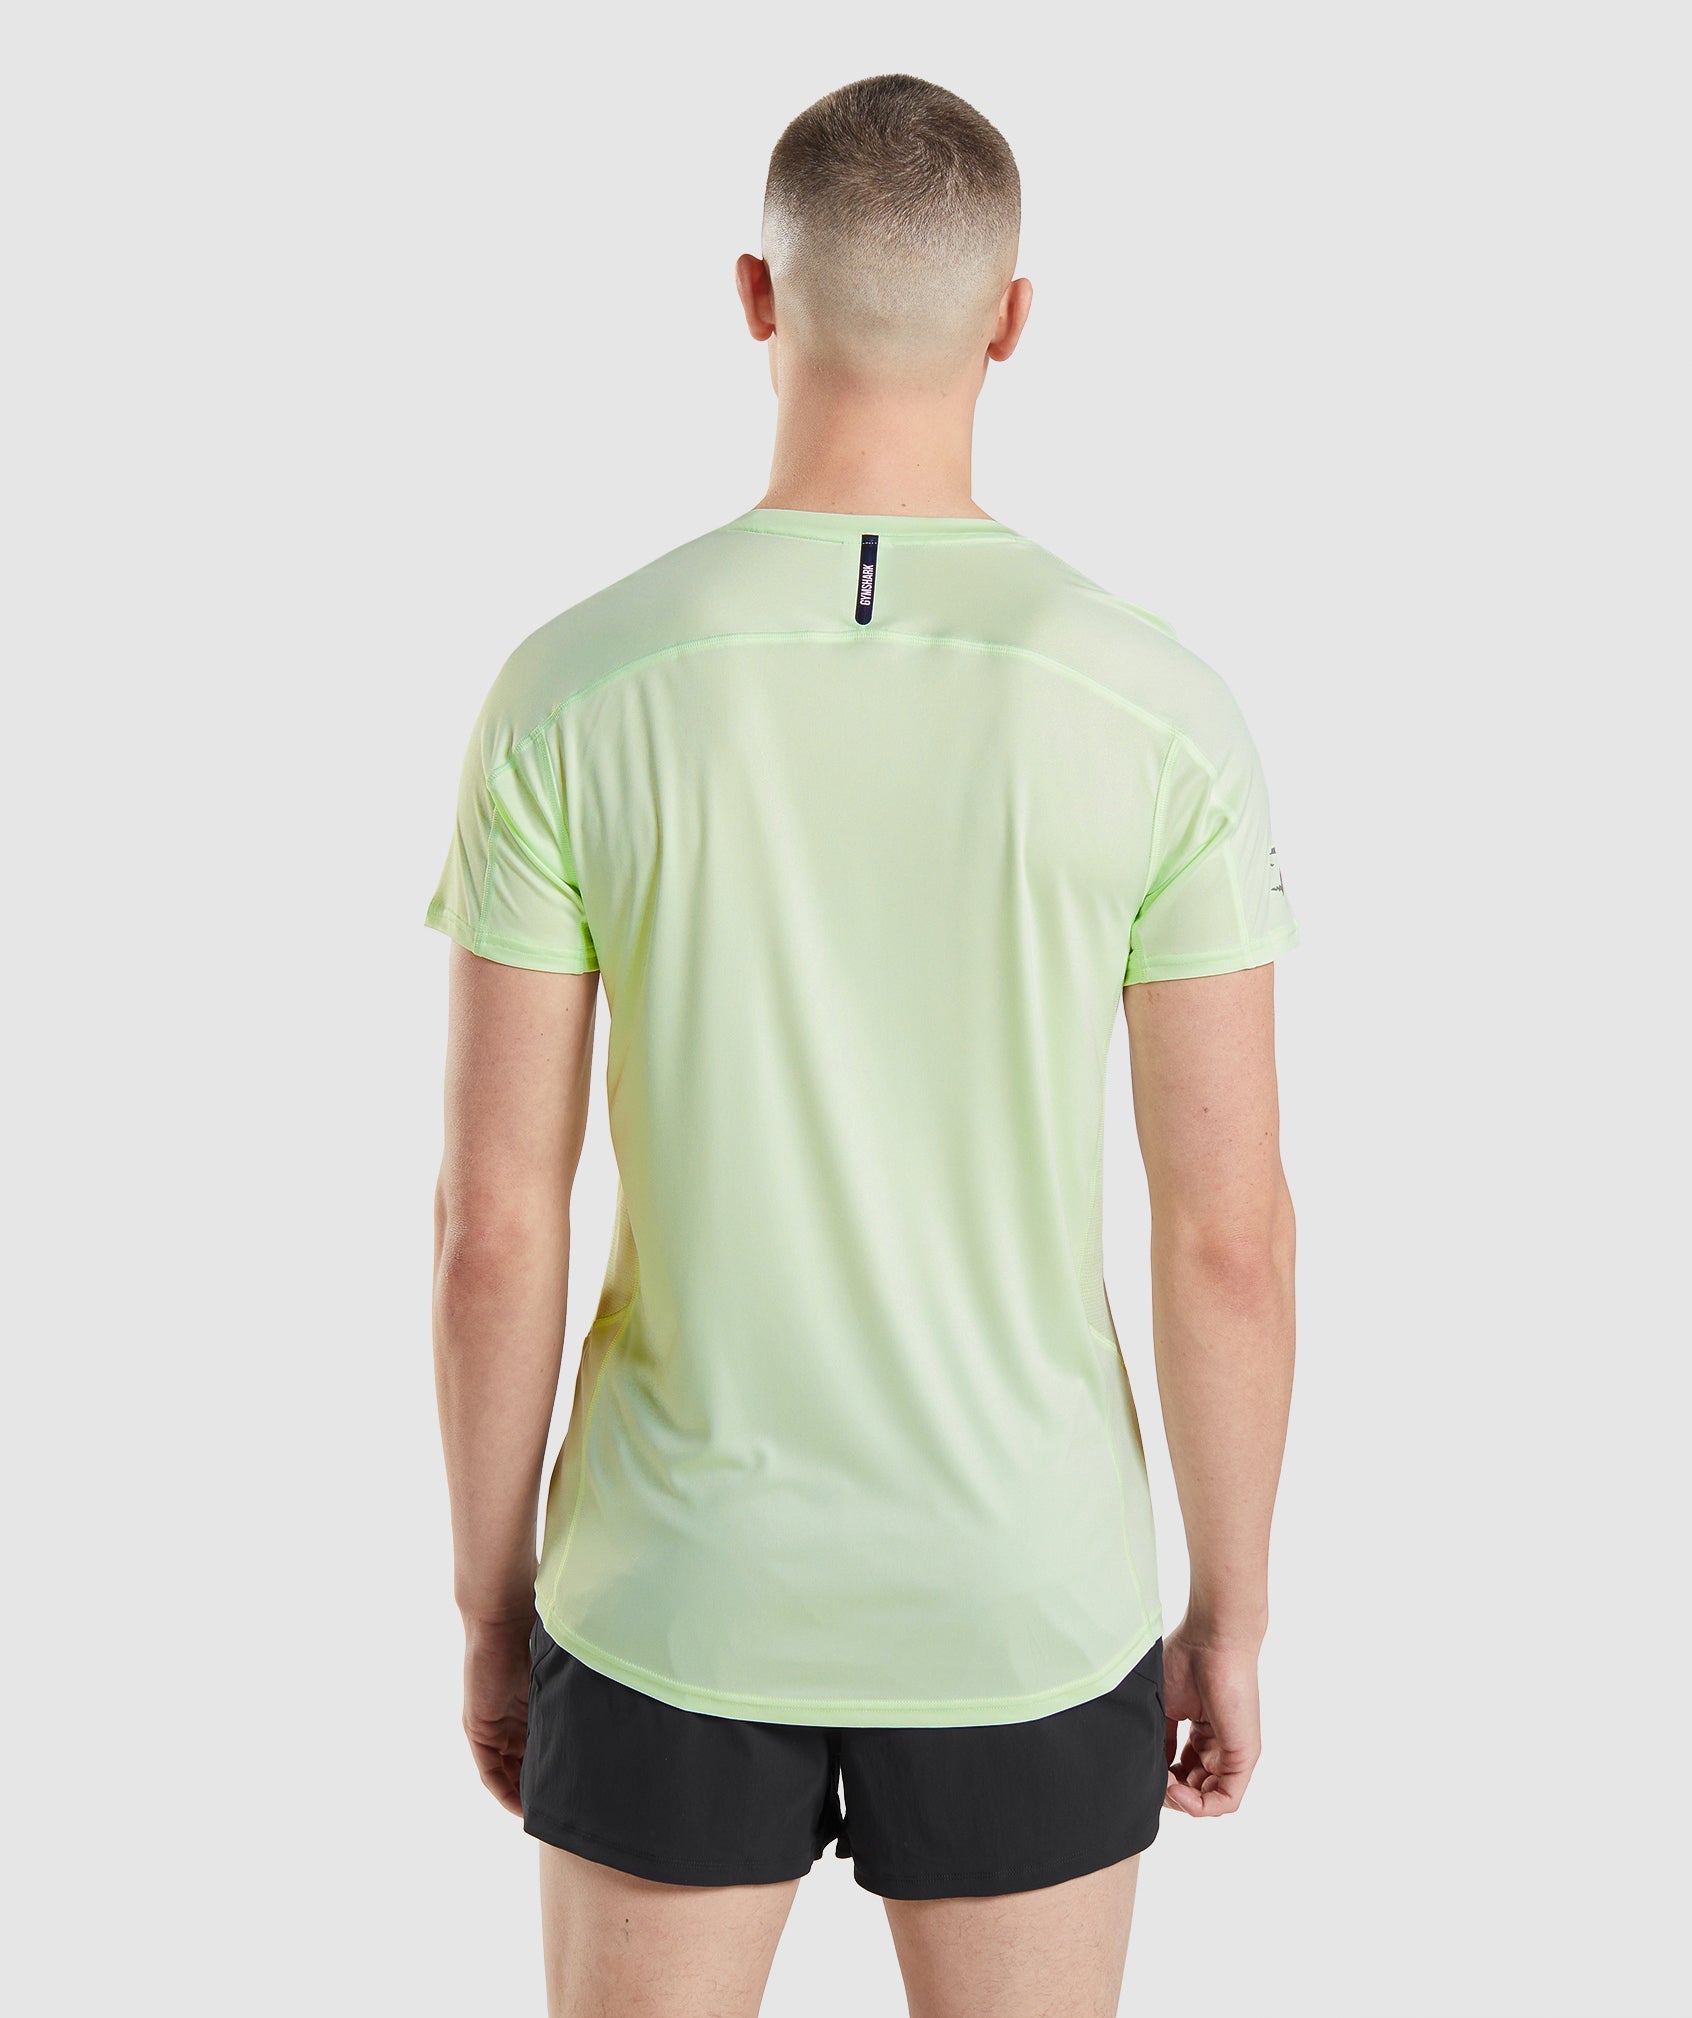 Speed Evolve T-Shirt in Cucumber Green - view 2